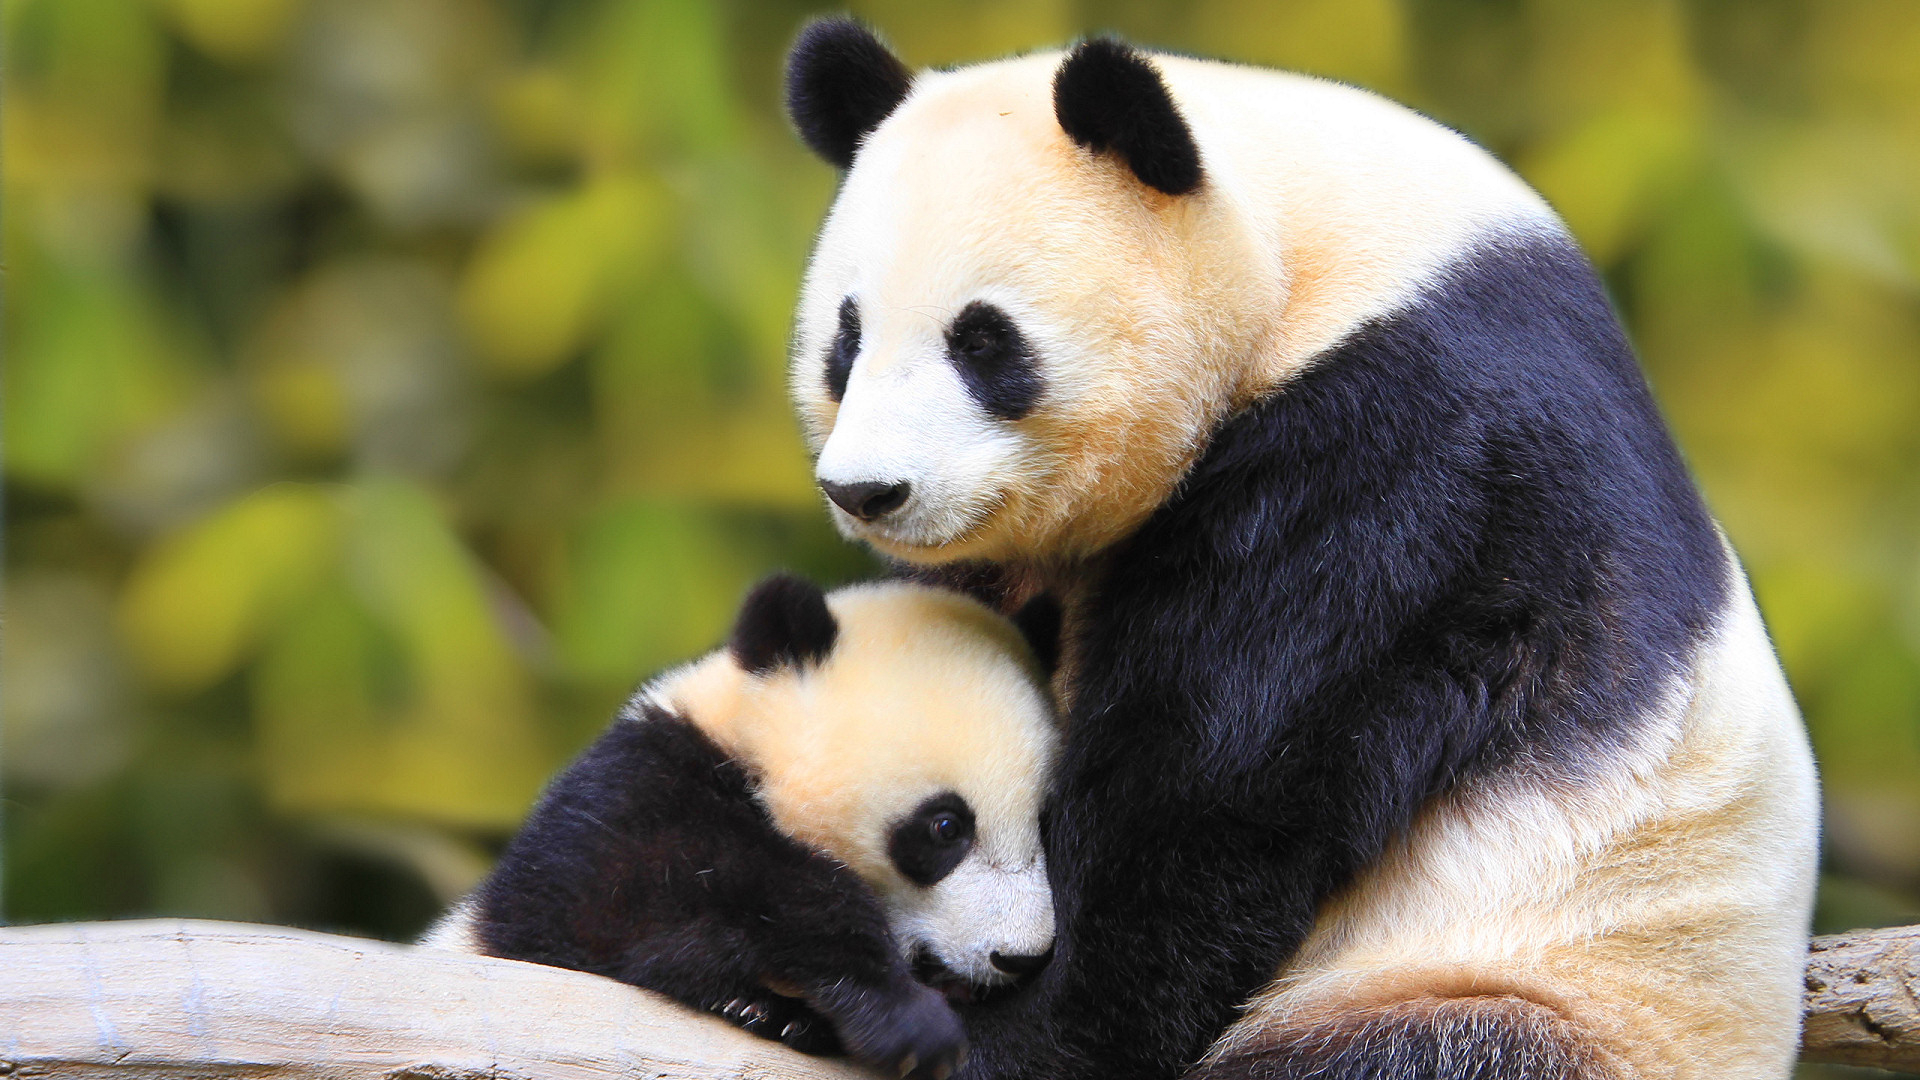 Baby Panda With Mother Wallpaper Android Wallpaper WallpaperLepi